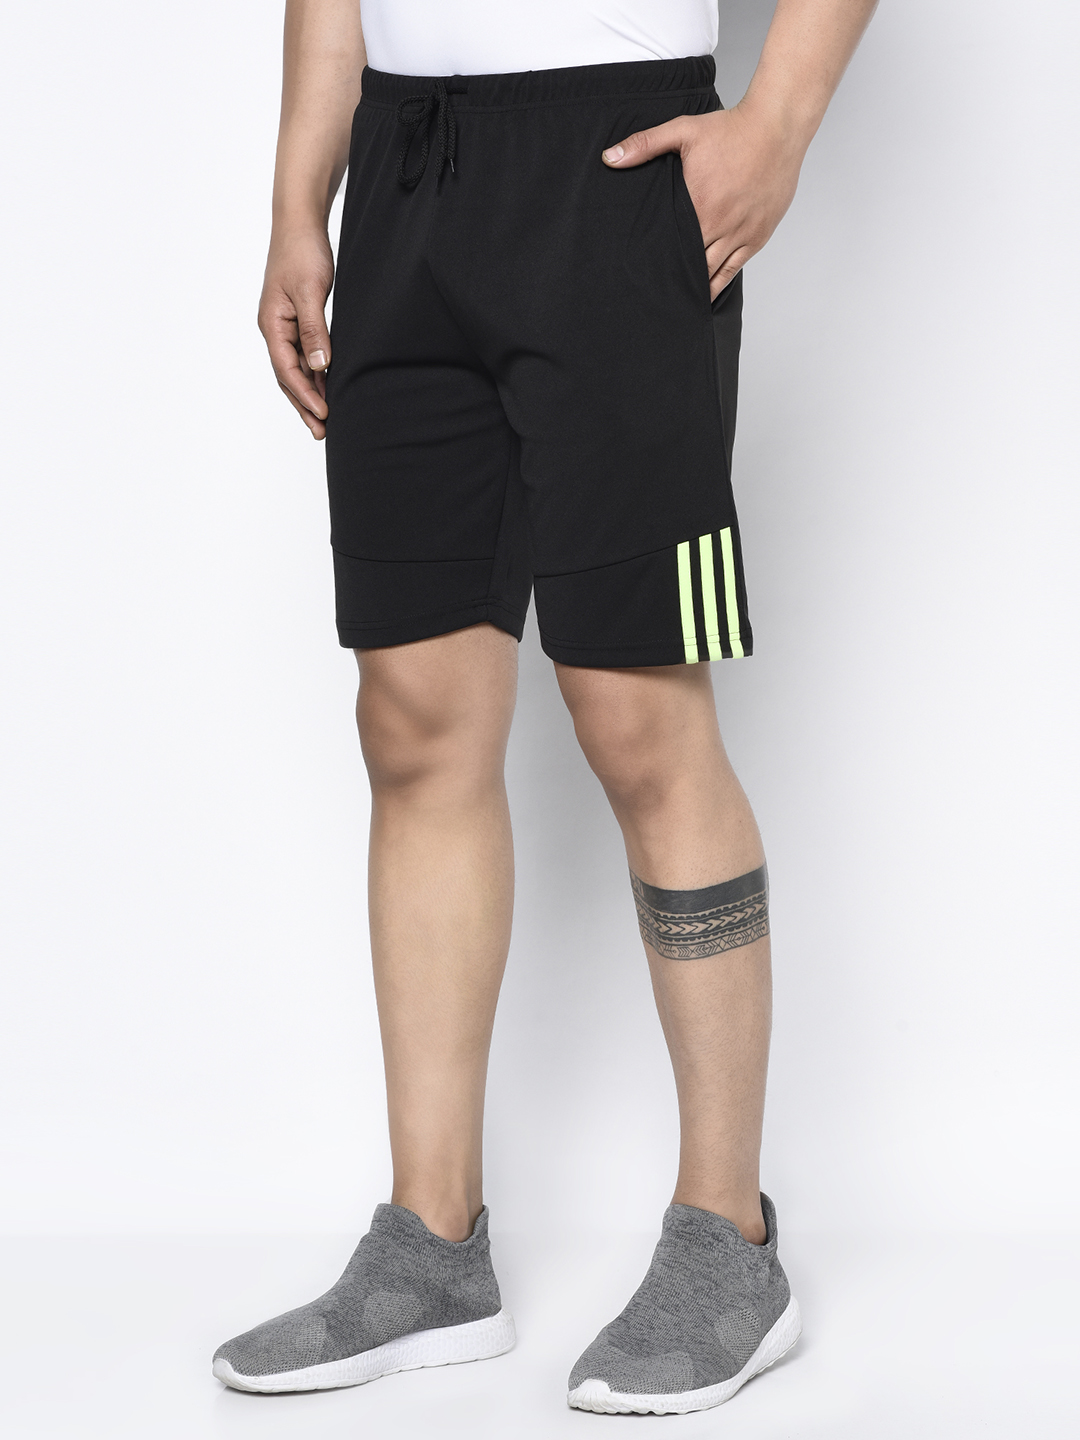 Glito Mens Stylish Solid Shorts With Stripe Pockets Bermuda for Gym,Running,Night Wear, Casual Wear Sports Shorts for Men's